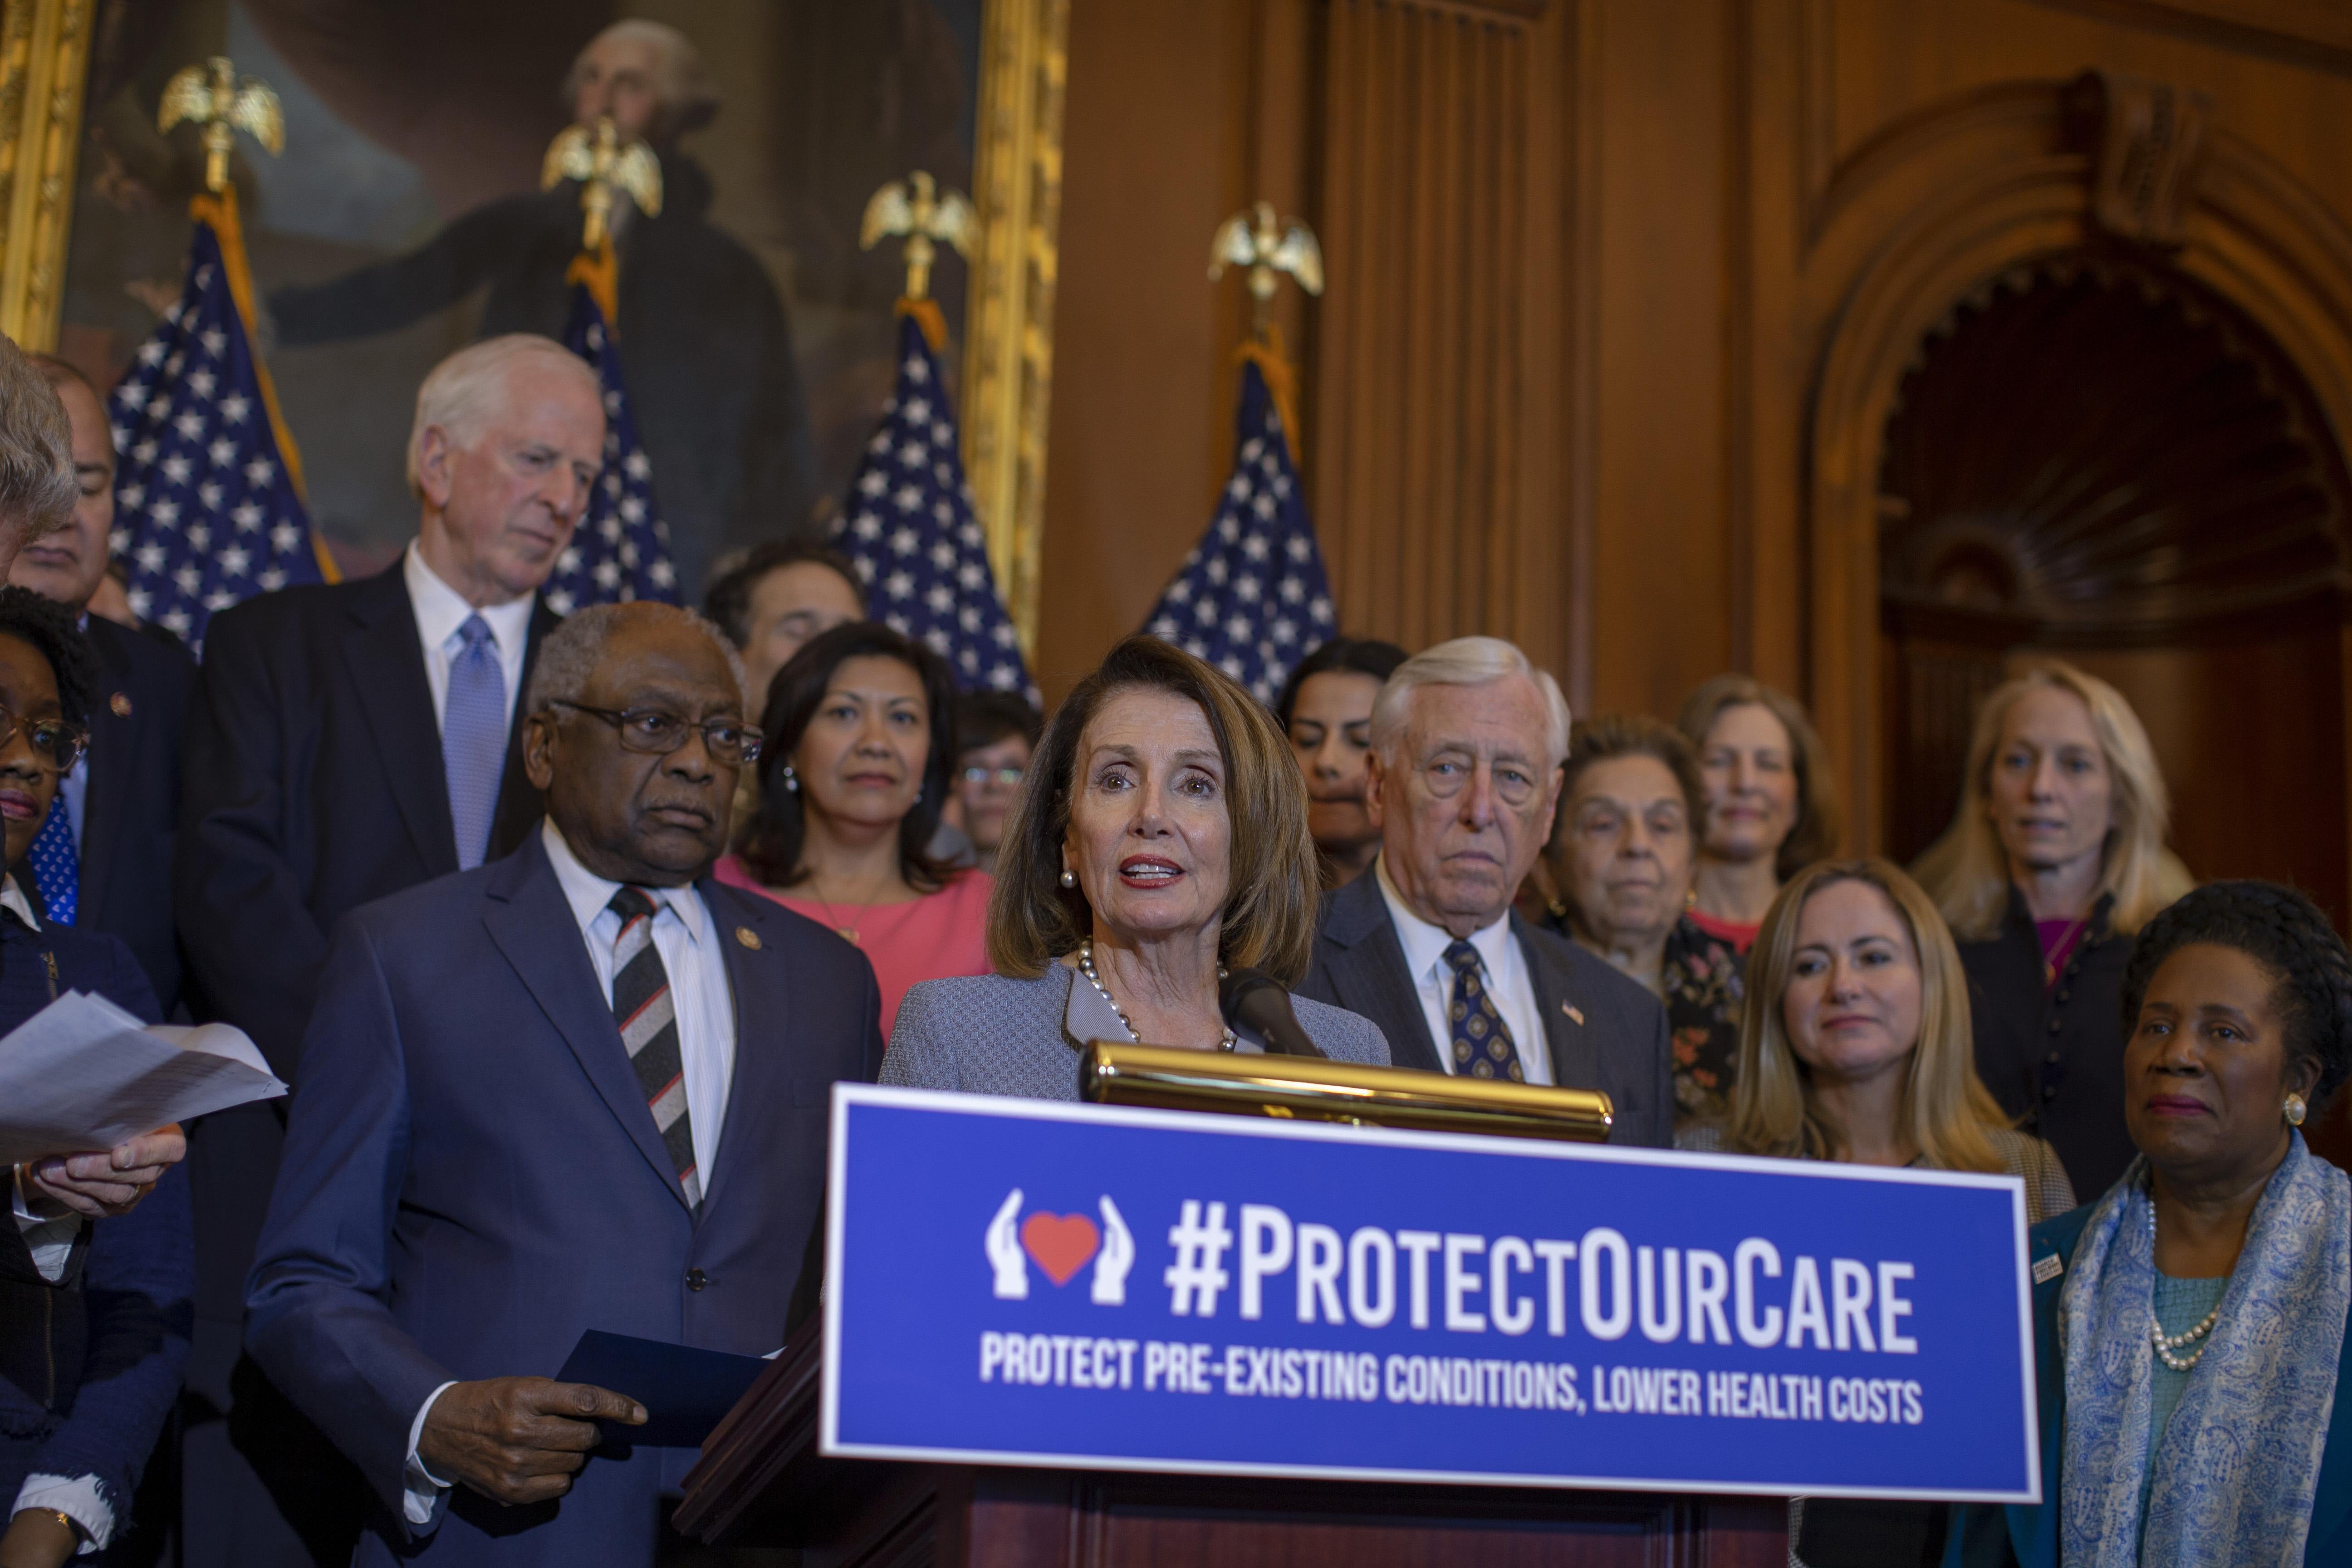 Pelosi, flanked by Steny Hoyer and other Democrats, speaks at a podium that has a "Protect Our Care" sign on it.